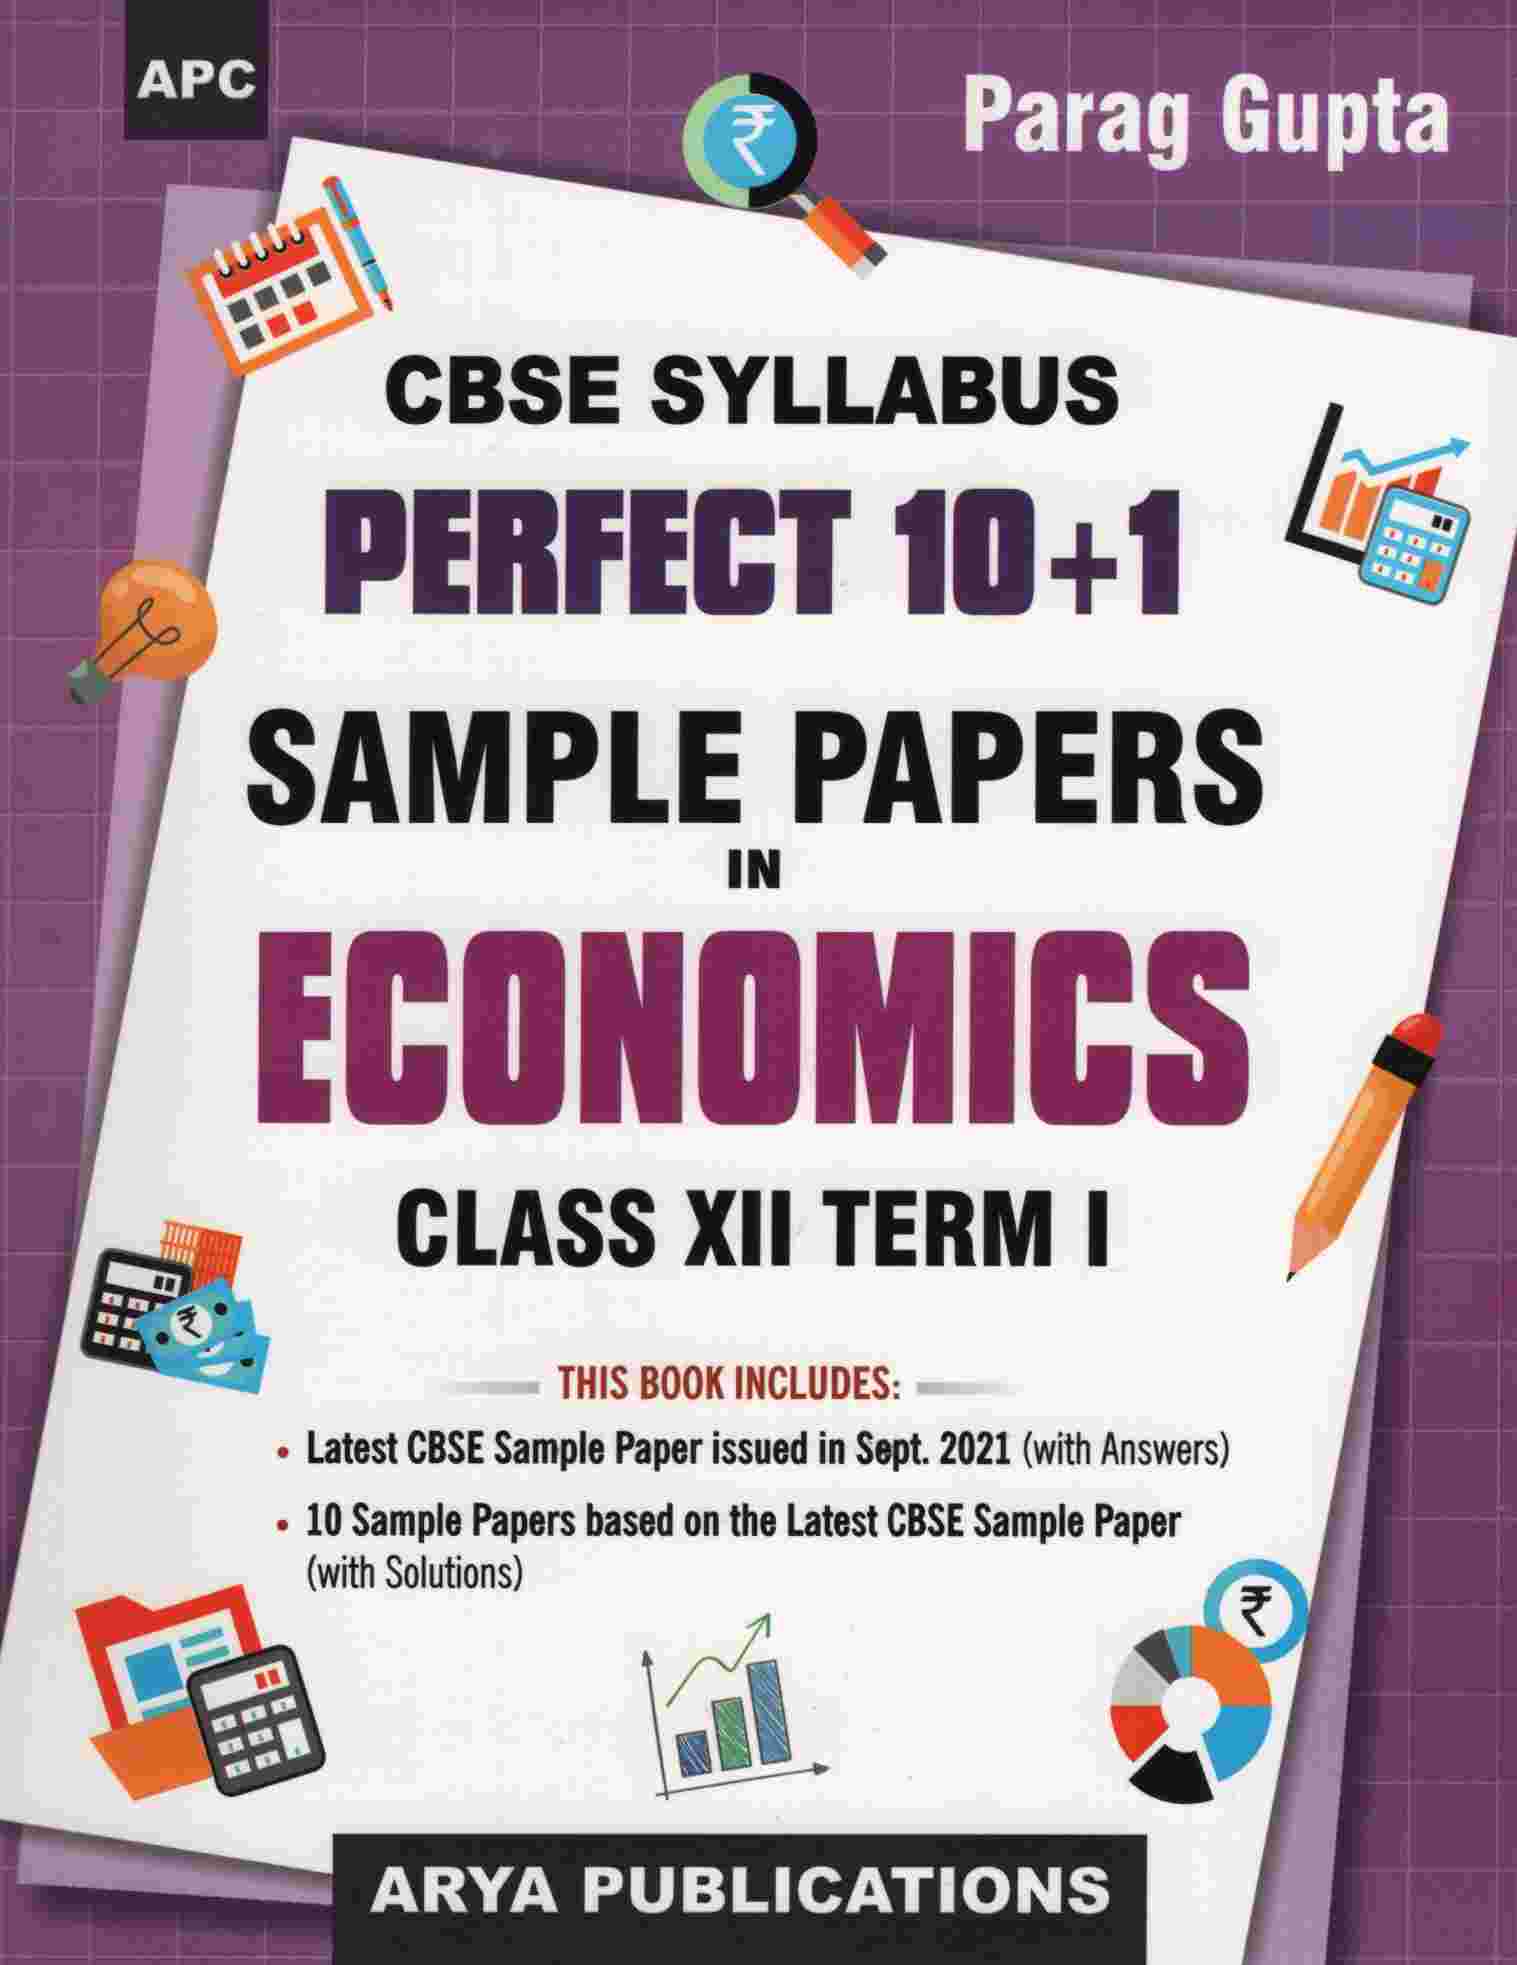 PERFECT 10+1 SAMPLE PAPERS IN ECONOMICS CLASS 12 TERM -I